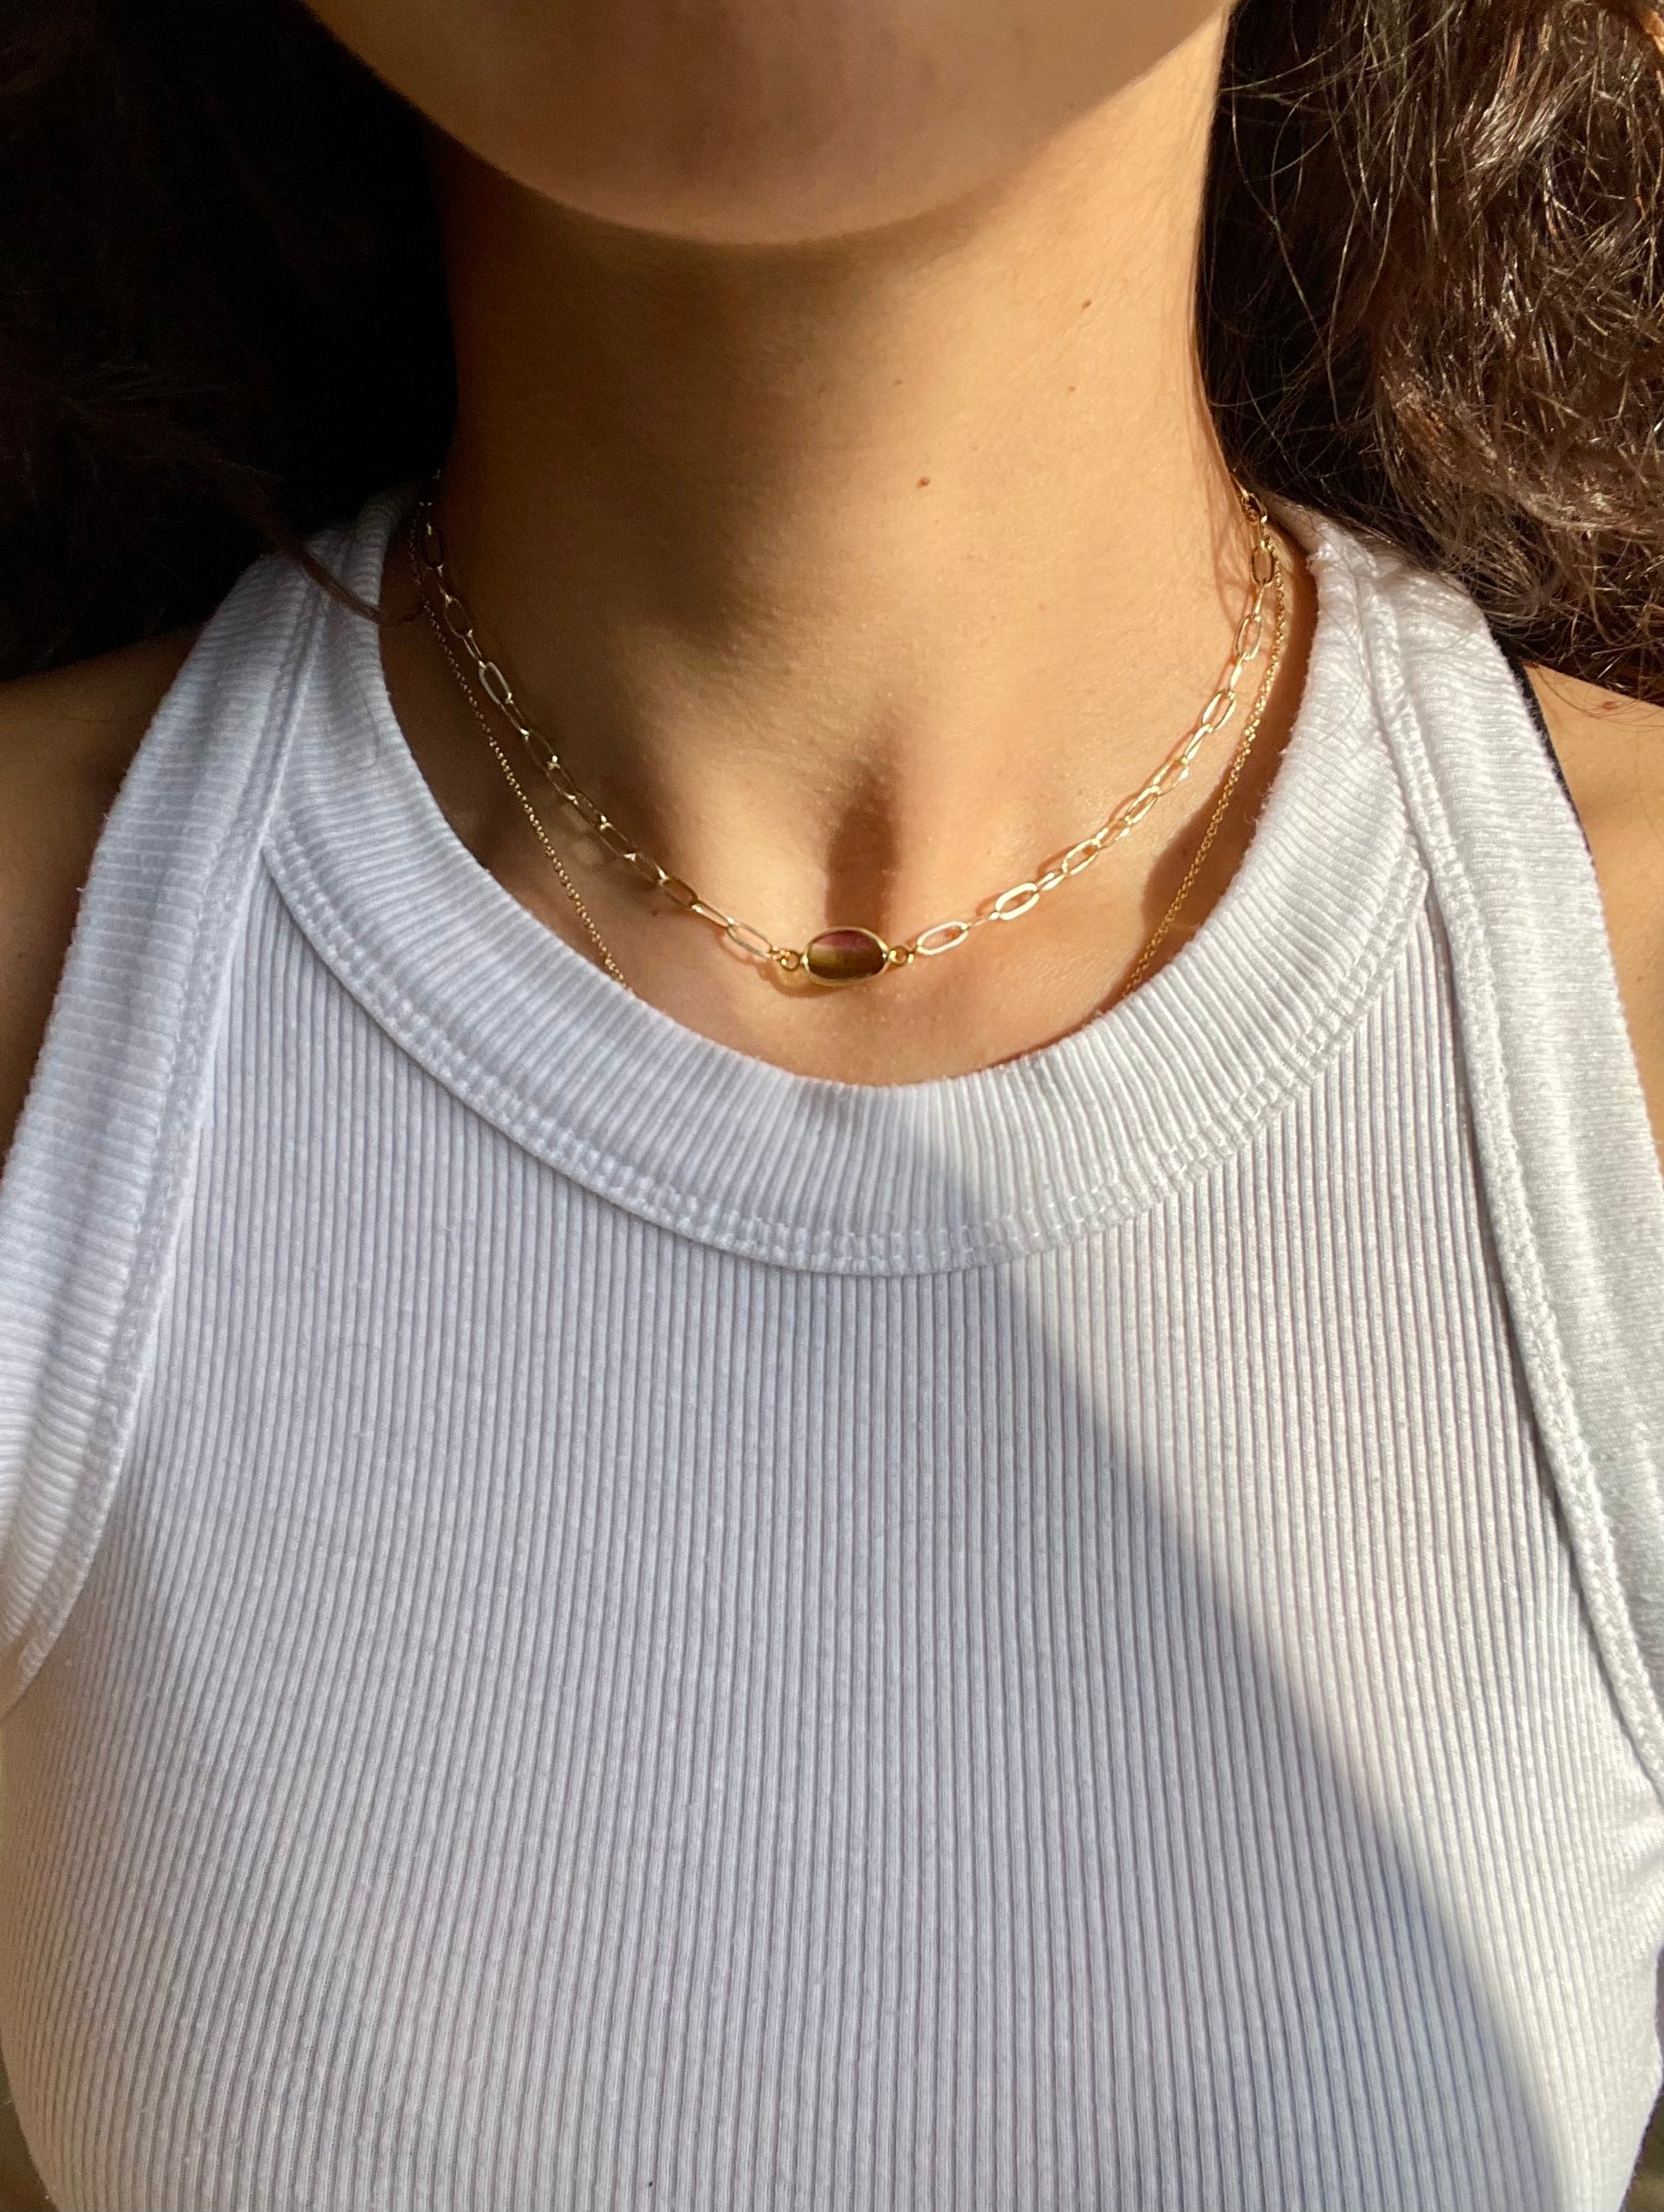 Gold chain with a tourmaline stone on a model